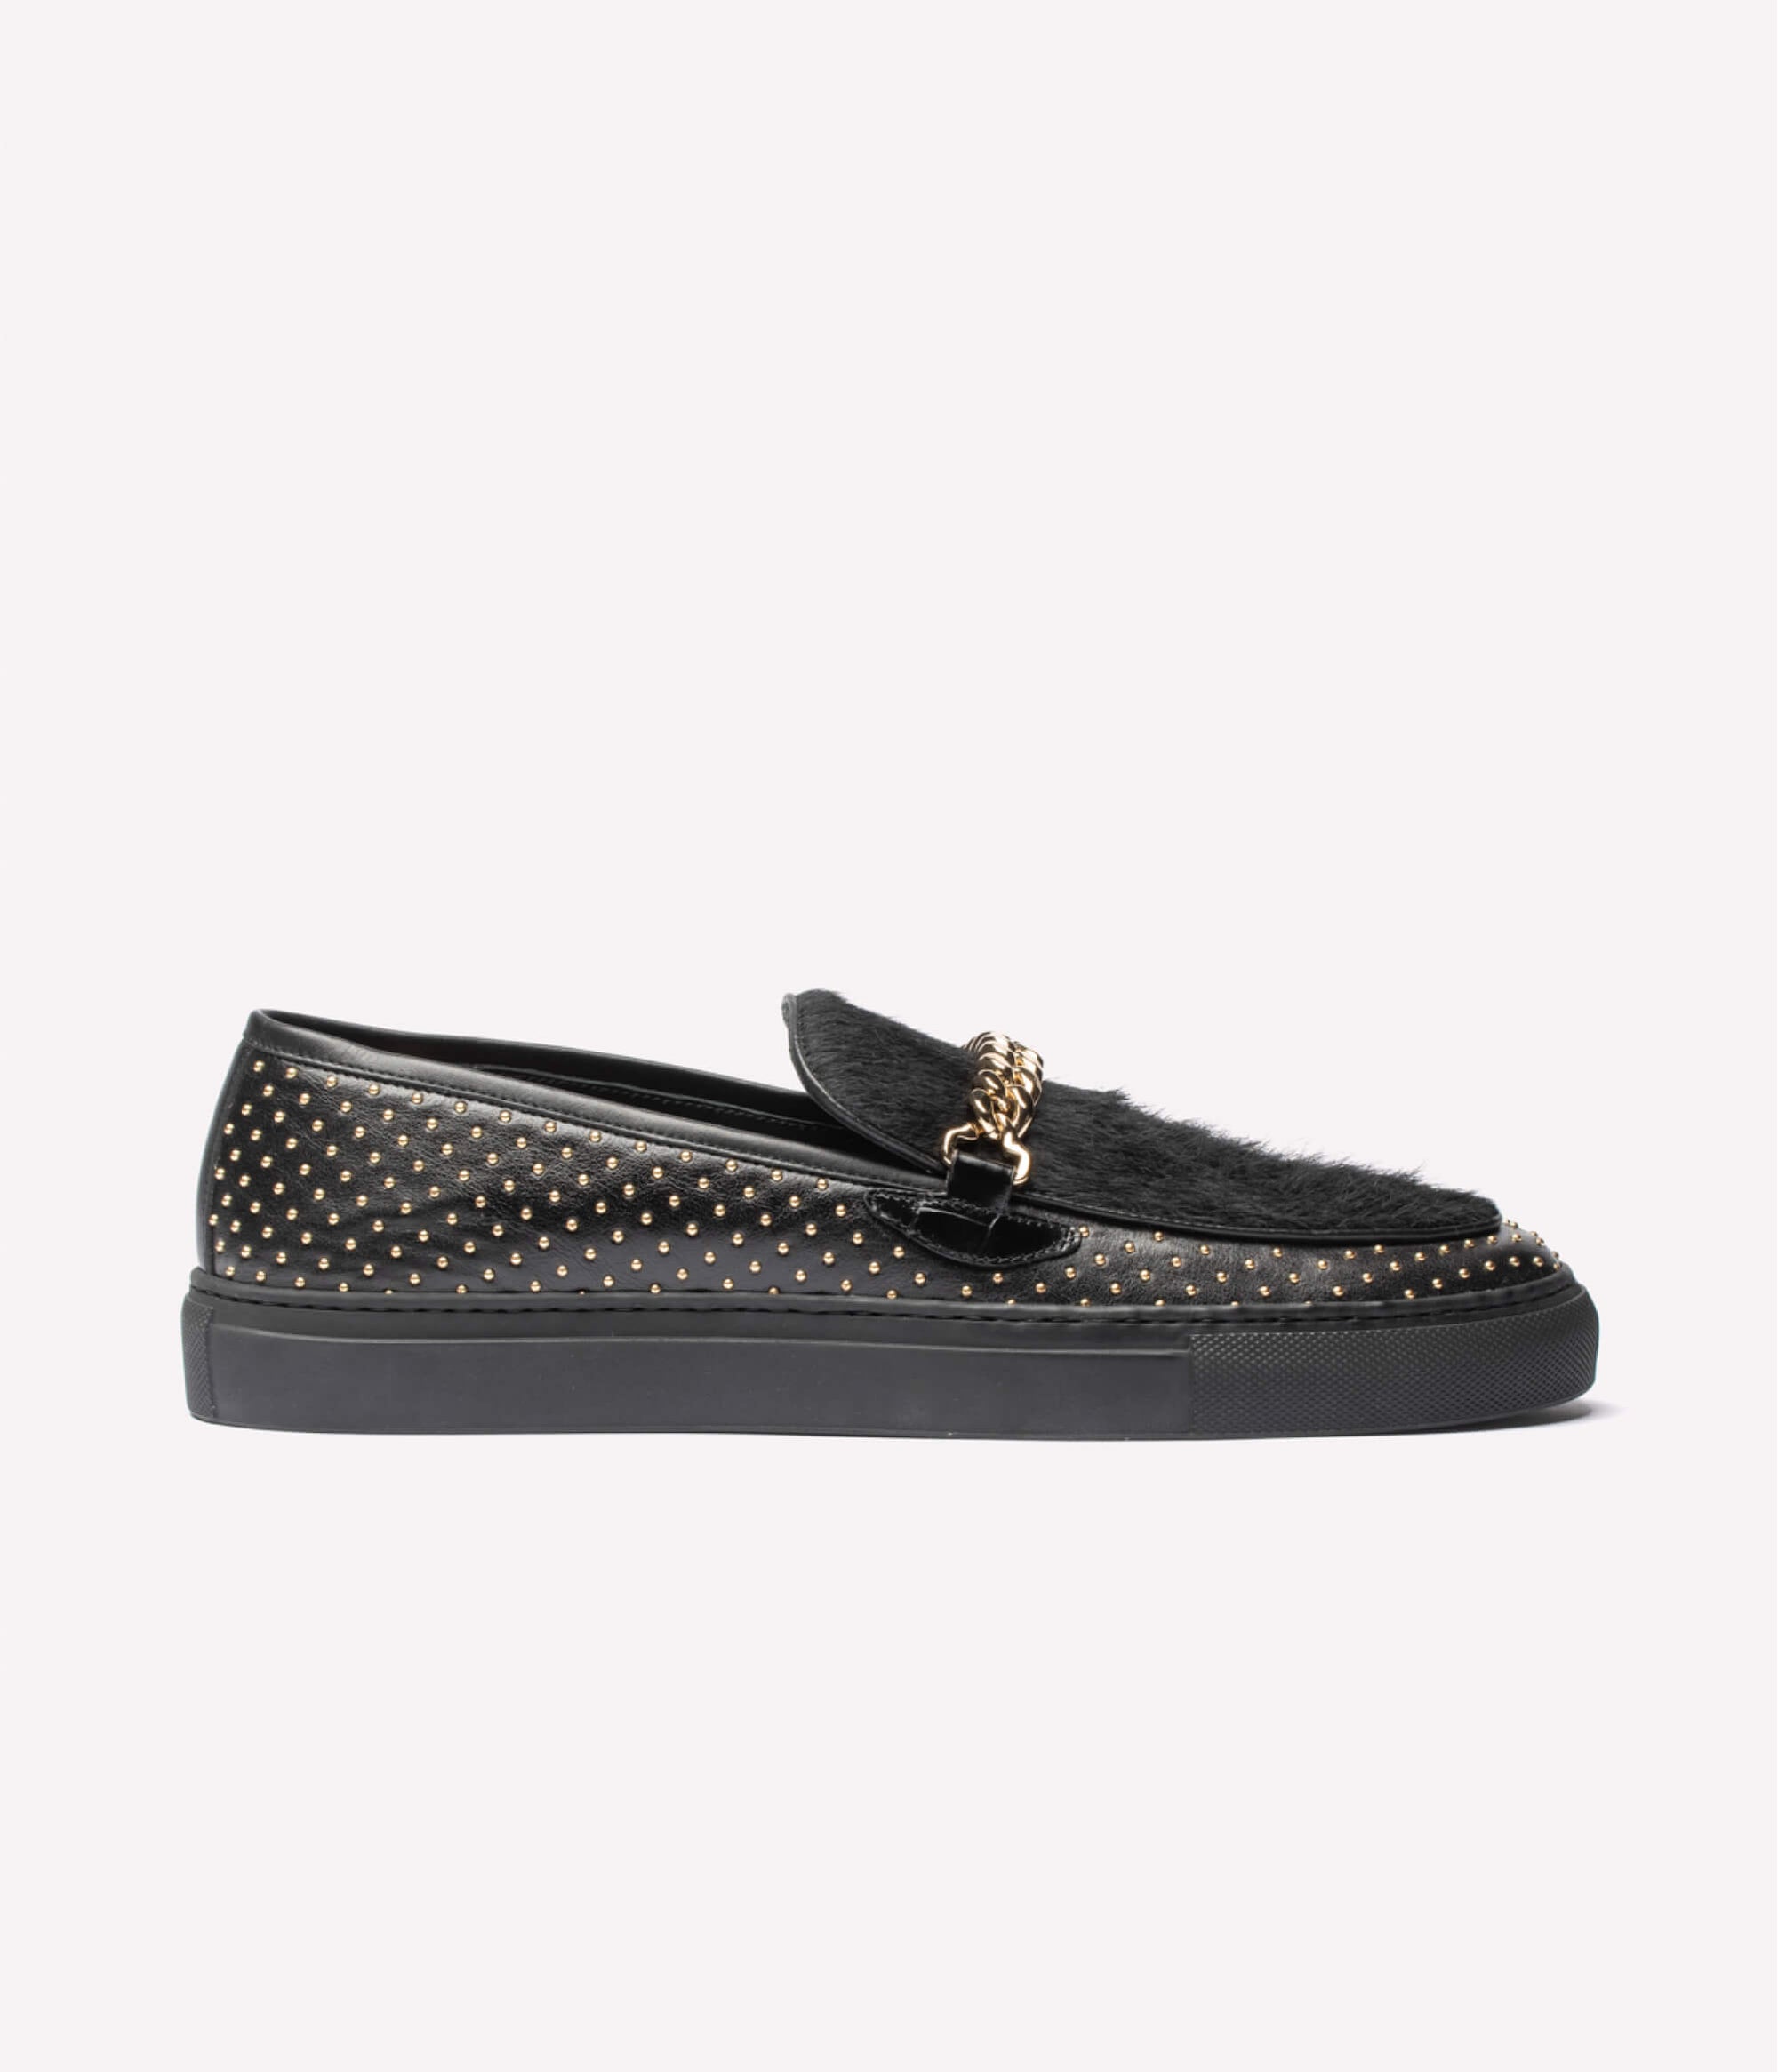 HUMAN RECREATIONAL SERVICES EL DORADO STUD BLACK LOAFER WITH A CUBAN LINK CHAIN